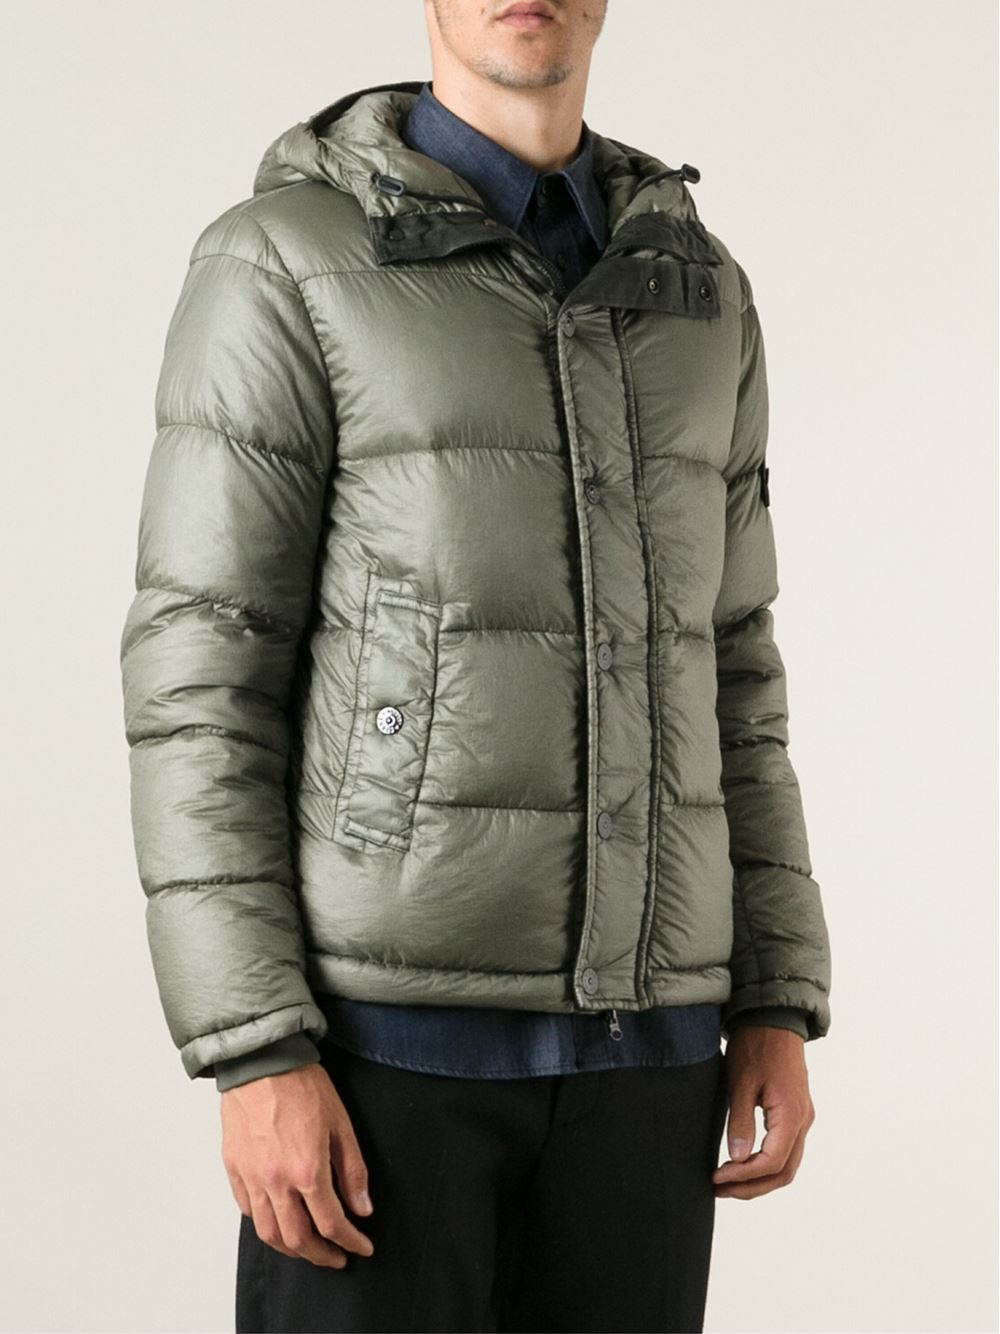 Stone Island Padded Jacket in Green for Men - Lyst